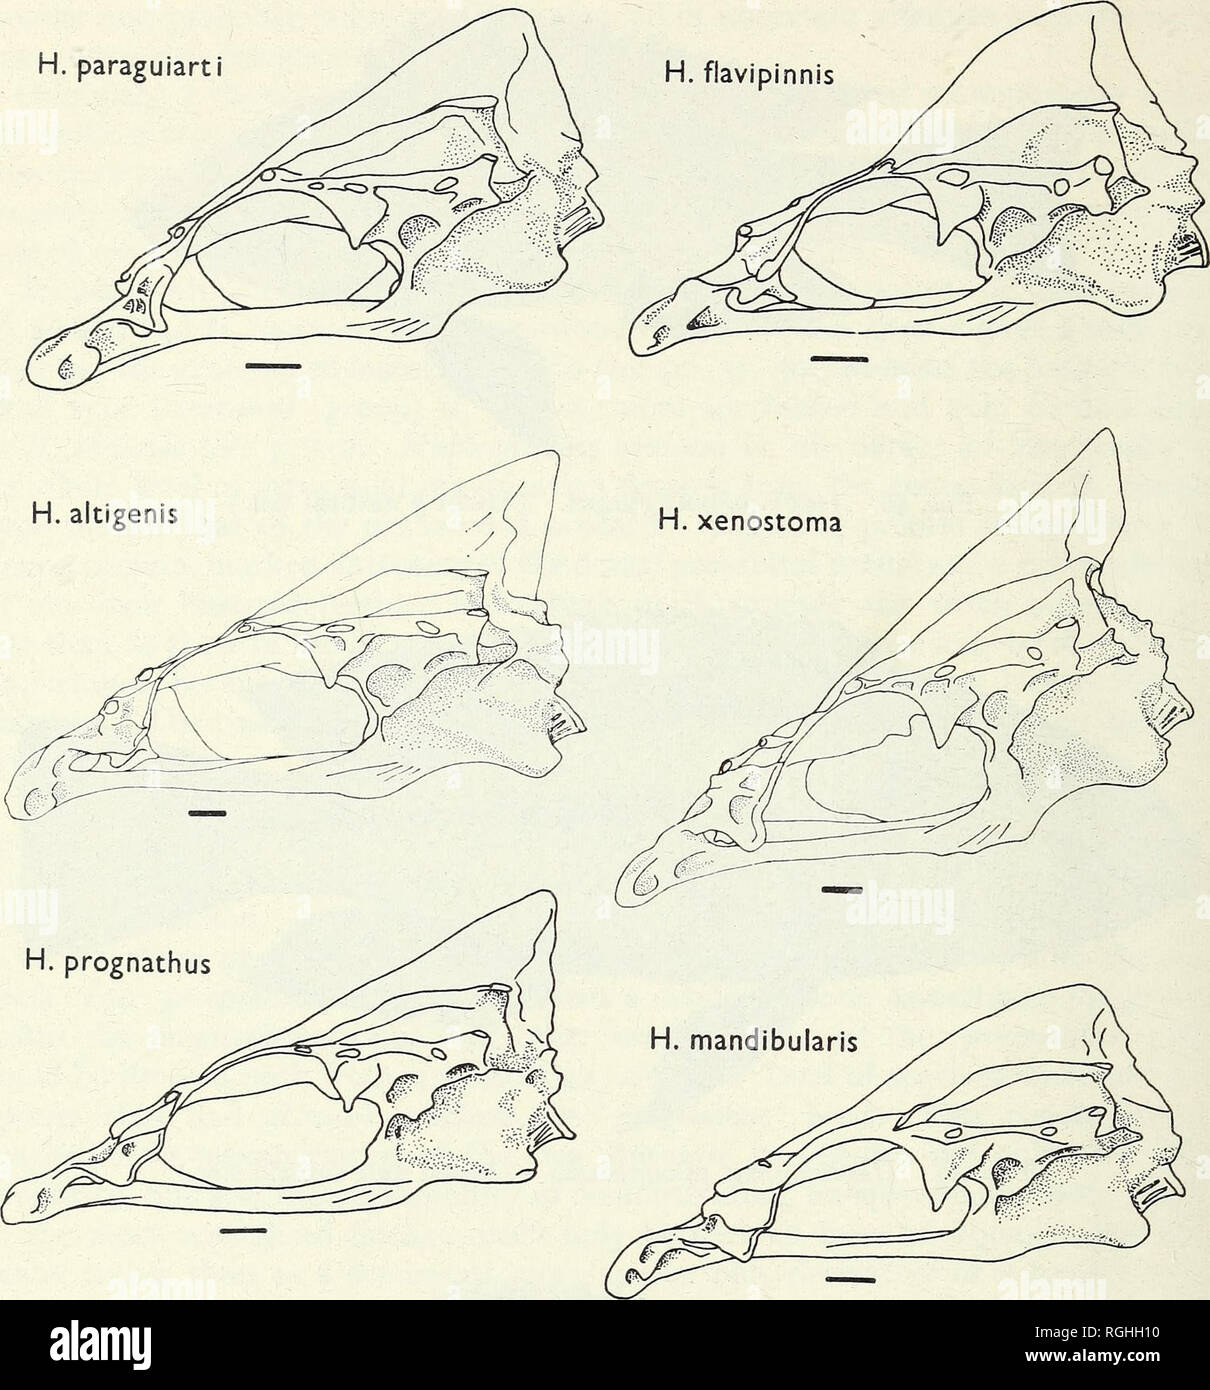 . Bulletin of the British Museum (Natural History). Zoology . Supplement.. 34 P. H. GREENWOOD. Fig. 51. Neurocranial form in piscivorous predators. (Scale = 3 mm.) To the eight species originally placed in the ' serranus' group (H. serranus [Text-fig. 11], H. victorianus, H. nyanzae, H. speki [Text-fig. 12], H. maculipinna [Text-fig. 47], H. boops, H. thuragnathus and H. pachycephalias ; see Greenwood, 1967), three others should be added, viz H. cavifrons [Text-fig. 3], H. plagiostoma [Text-fig. 47] and H. decticostoma (see Greenwood, 1967; Greenwood &amp; Gee, 1969). Neurocranial morphology i Stock Photo